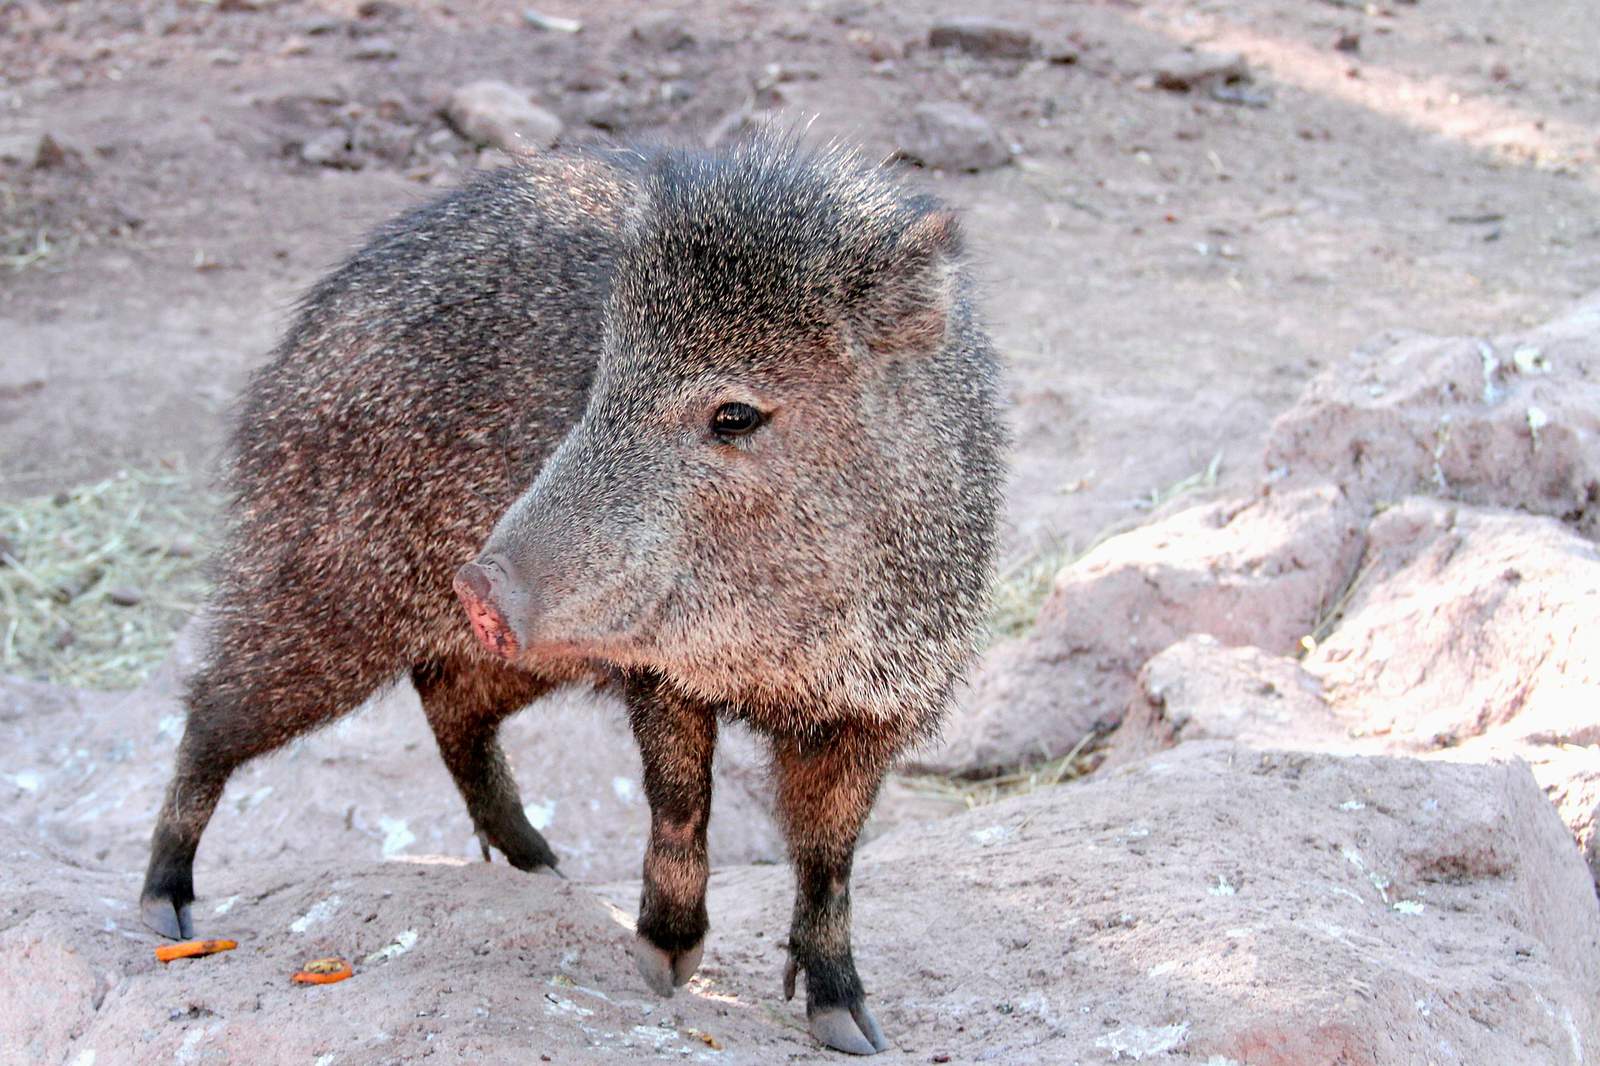 Not wild pigs: In appreciation of javelinas, iconic native wildlife of Texas